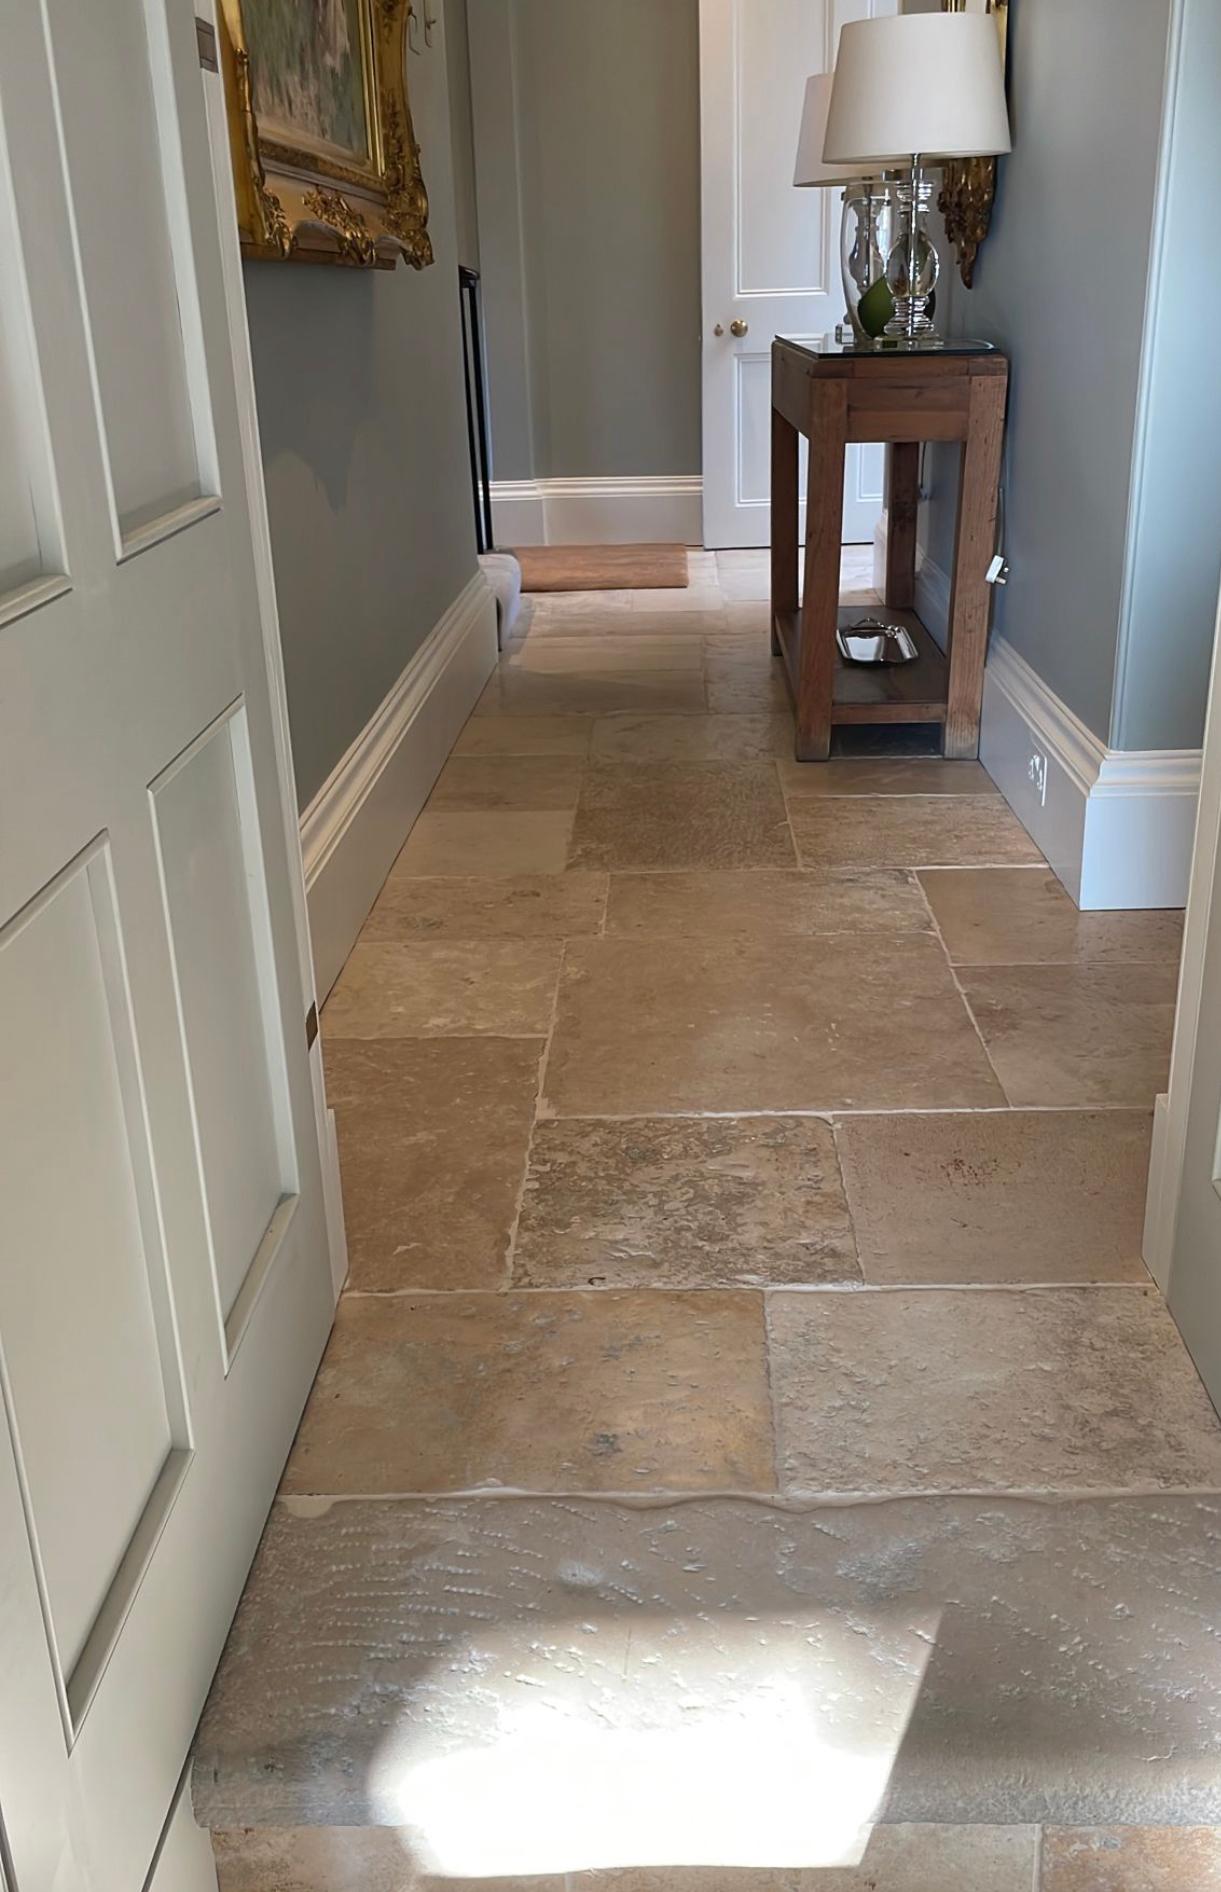 What is the best natural stone for floors?